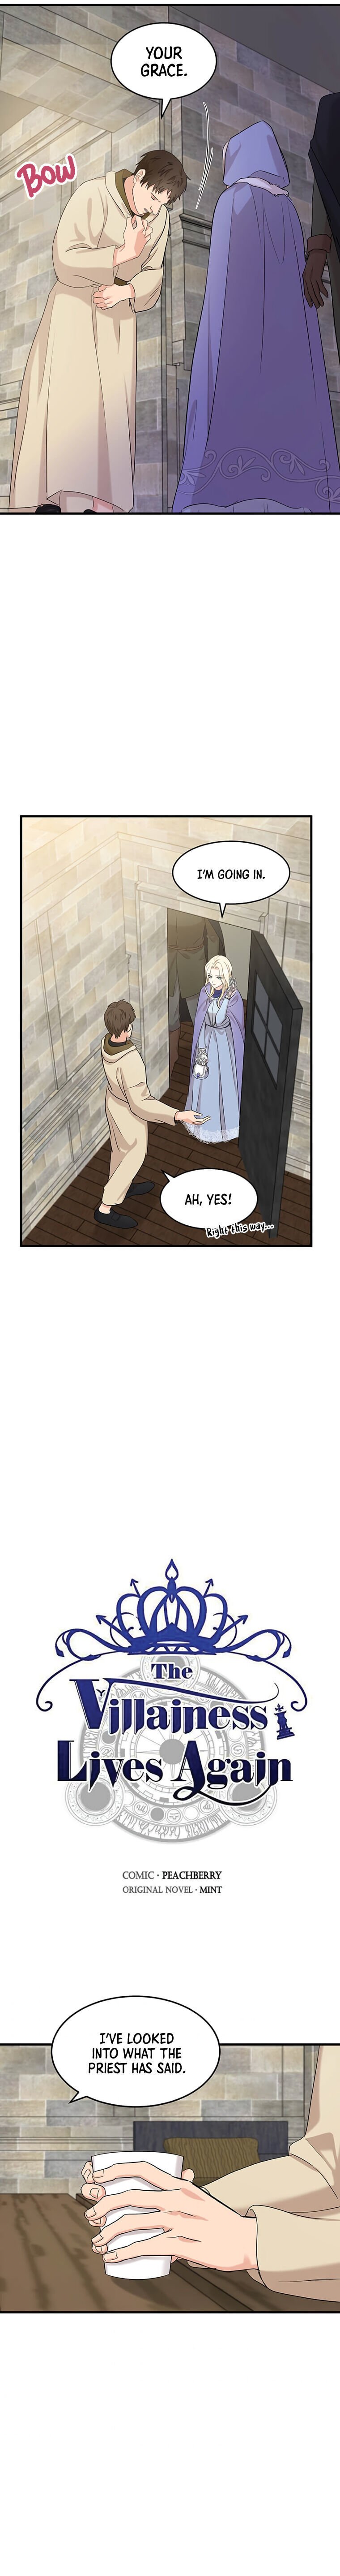 the-villainess-lives-twice-chap-82-1